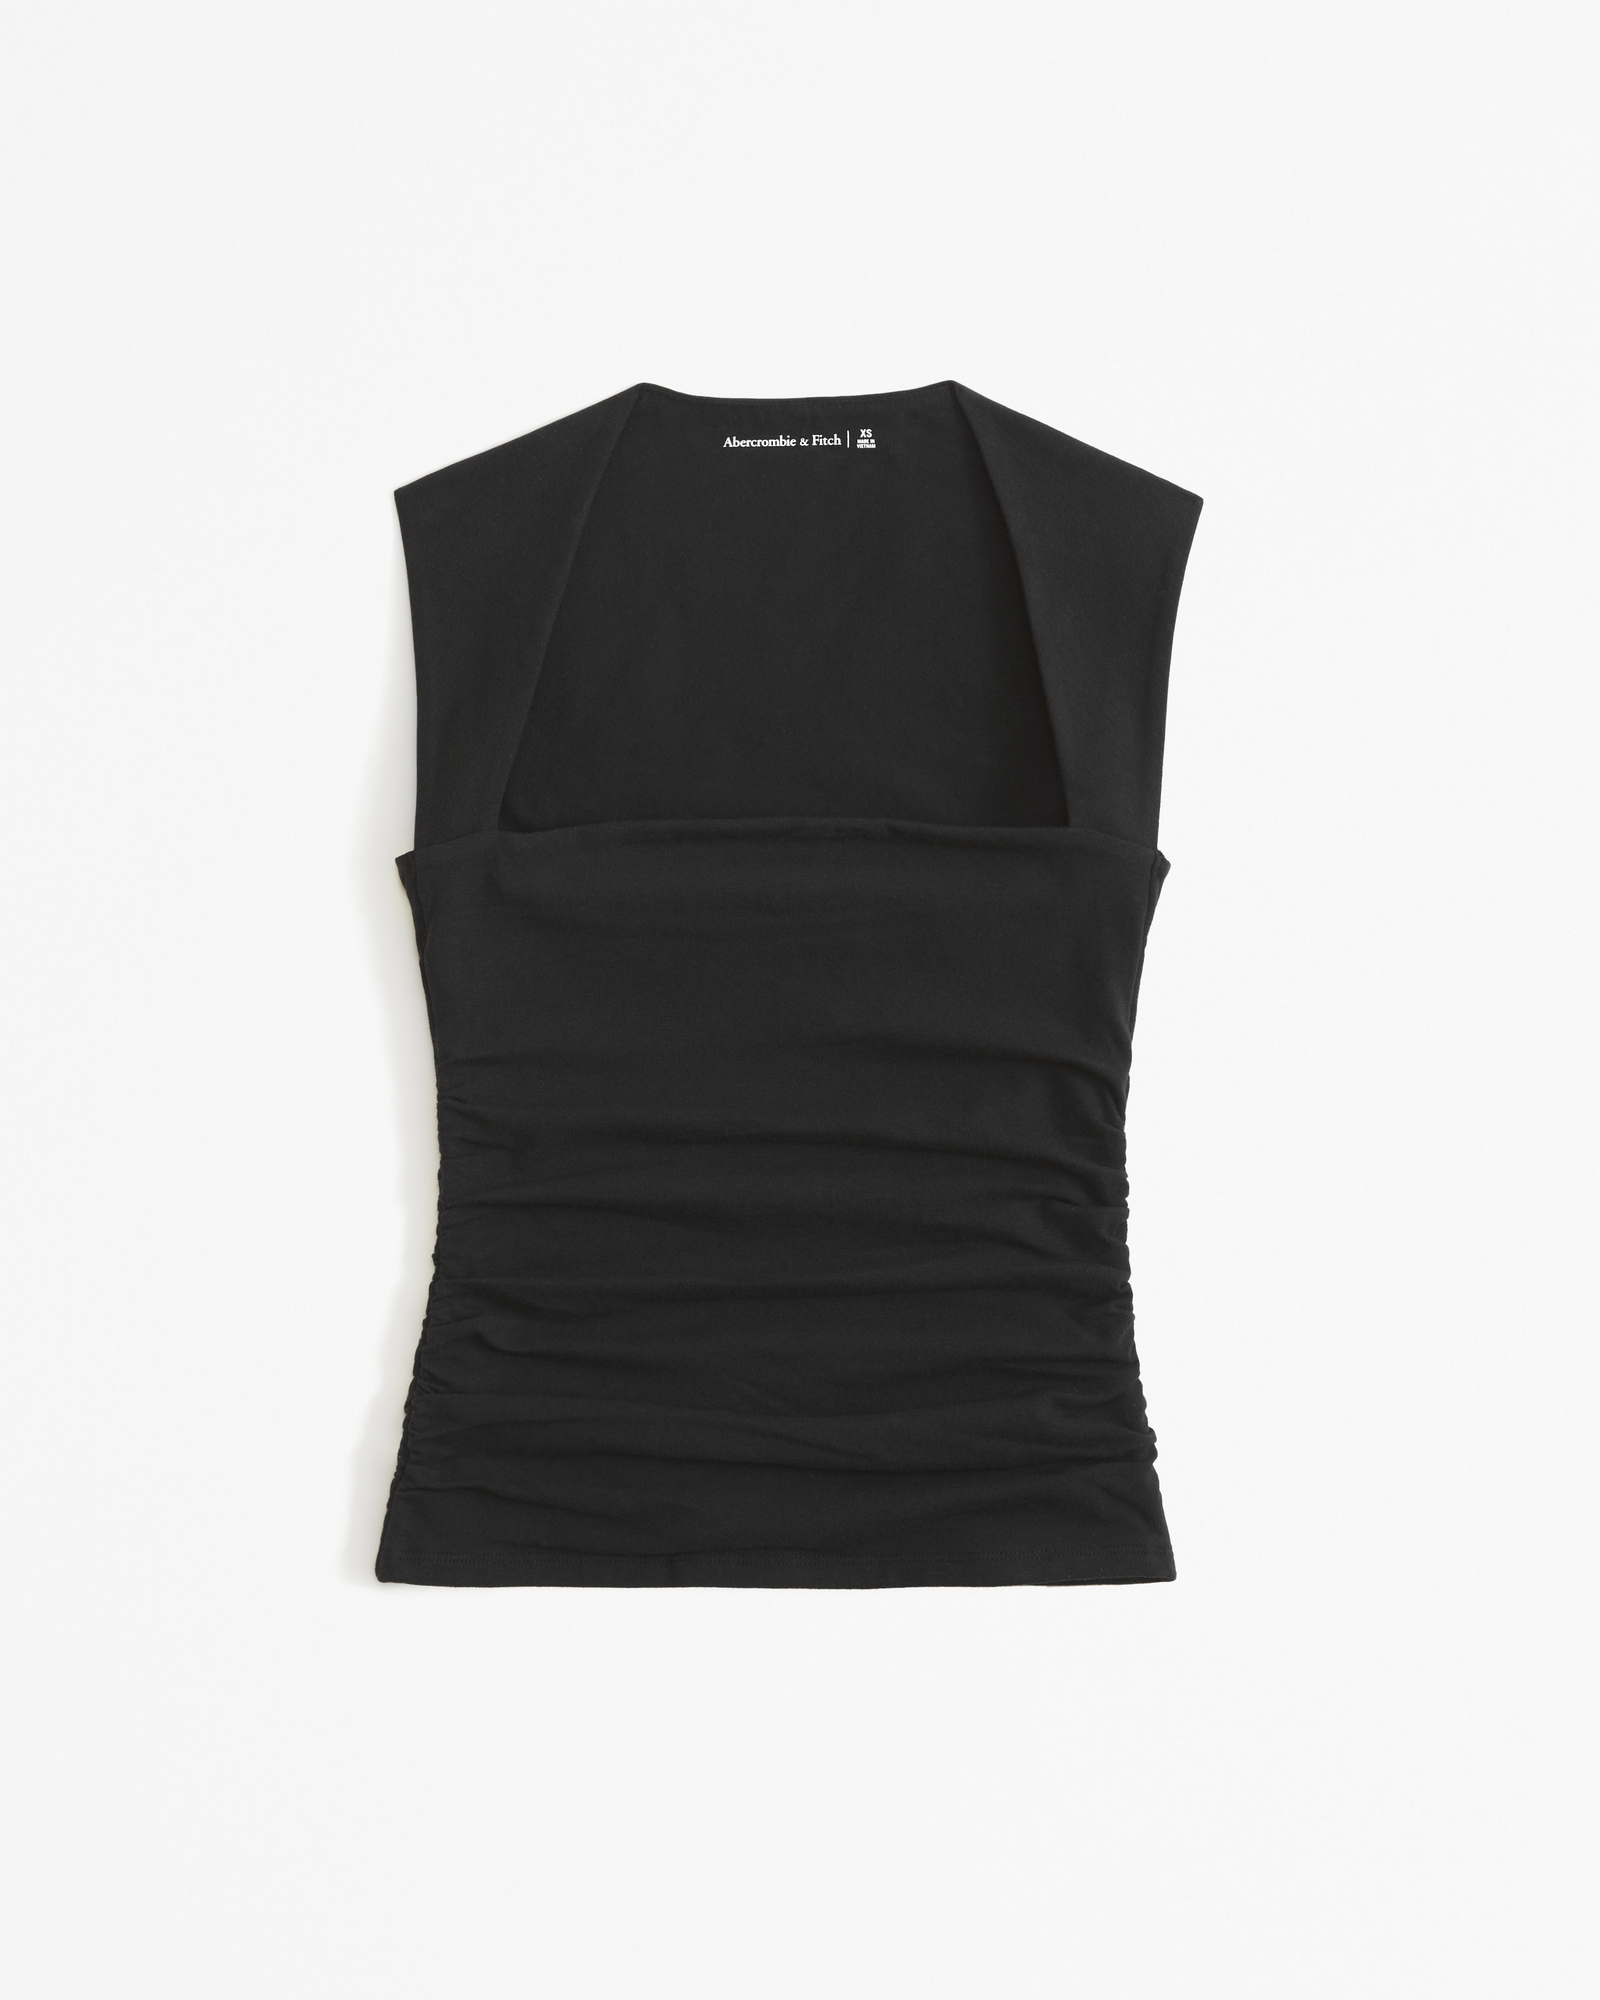 The A&F Ava Cotton-Blend Seamless Fabric Ruched Portrait Top